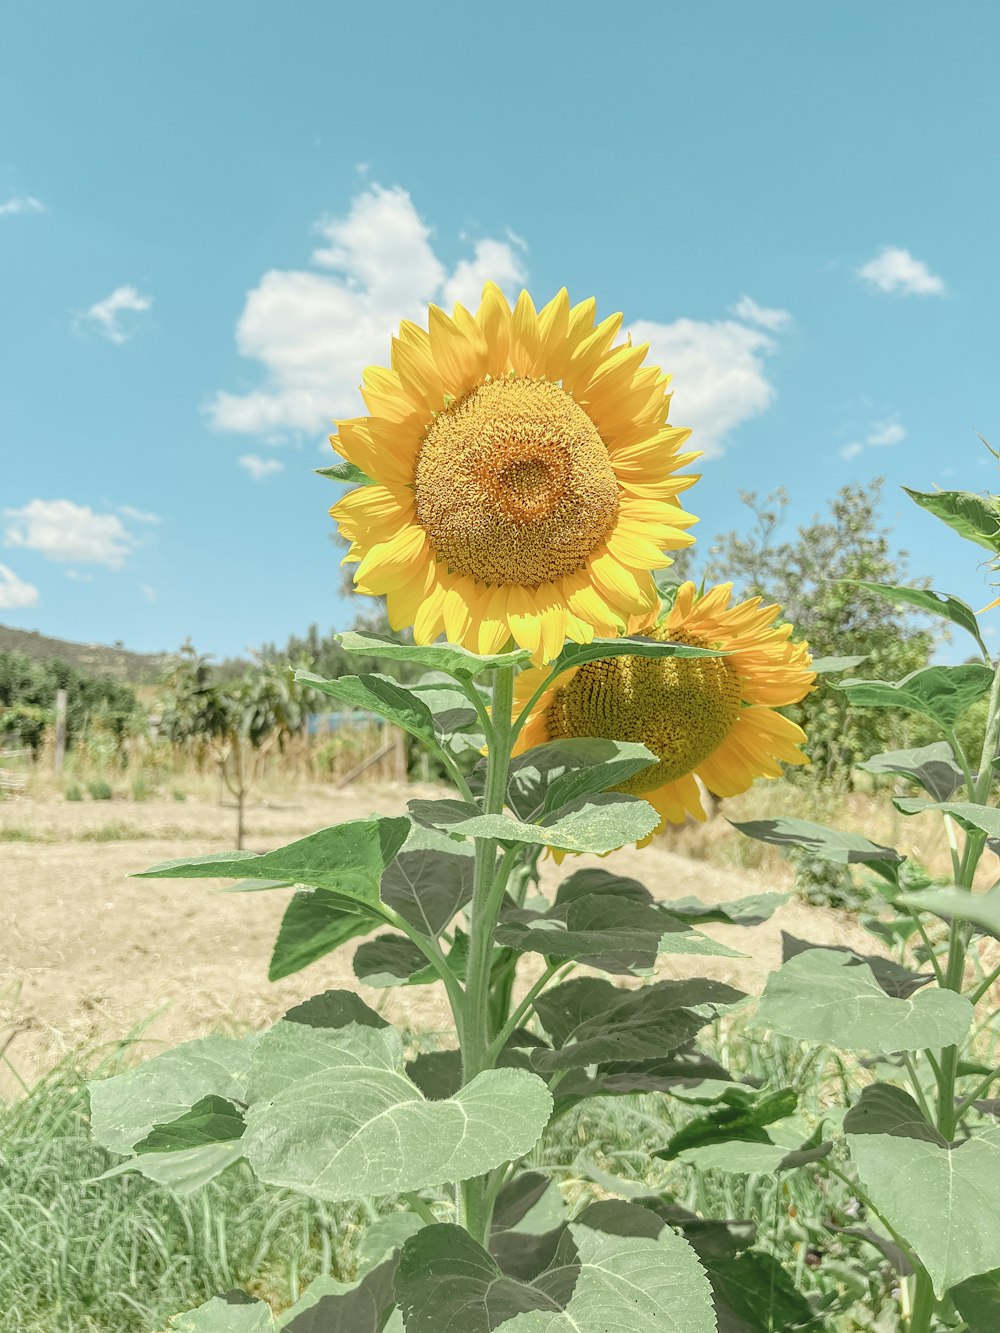 a sunflower in a field with a blue sky in the background